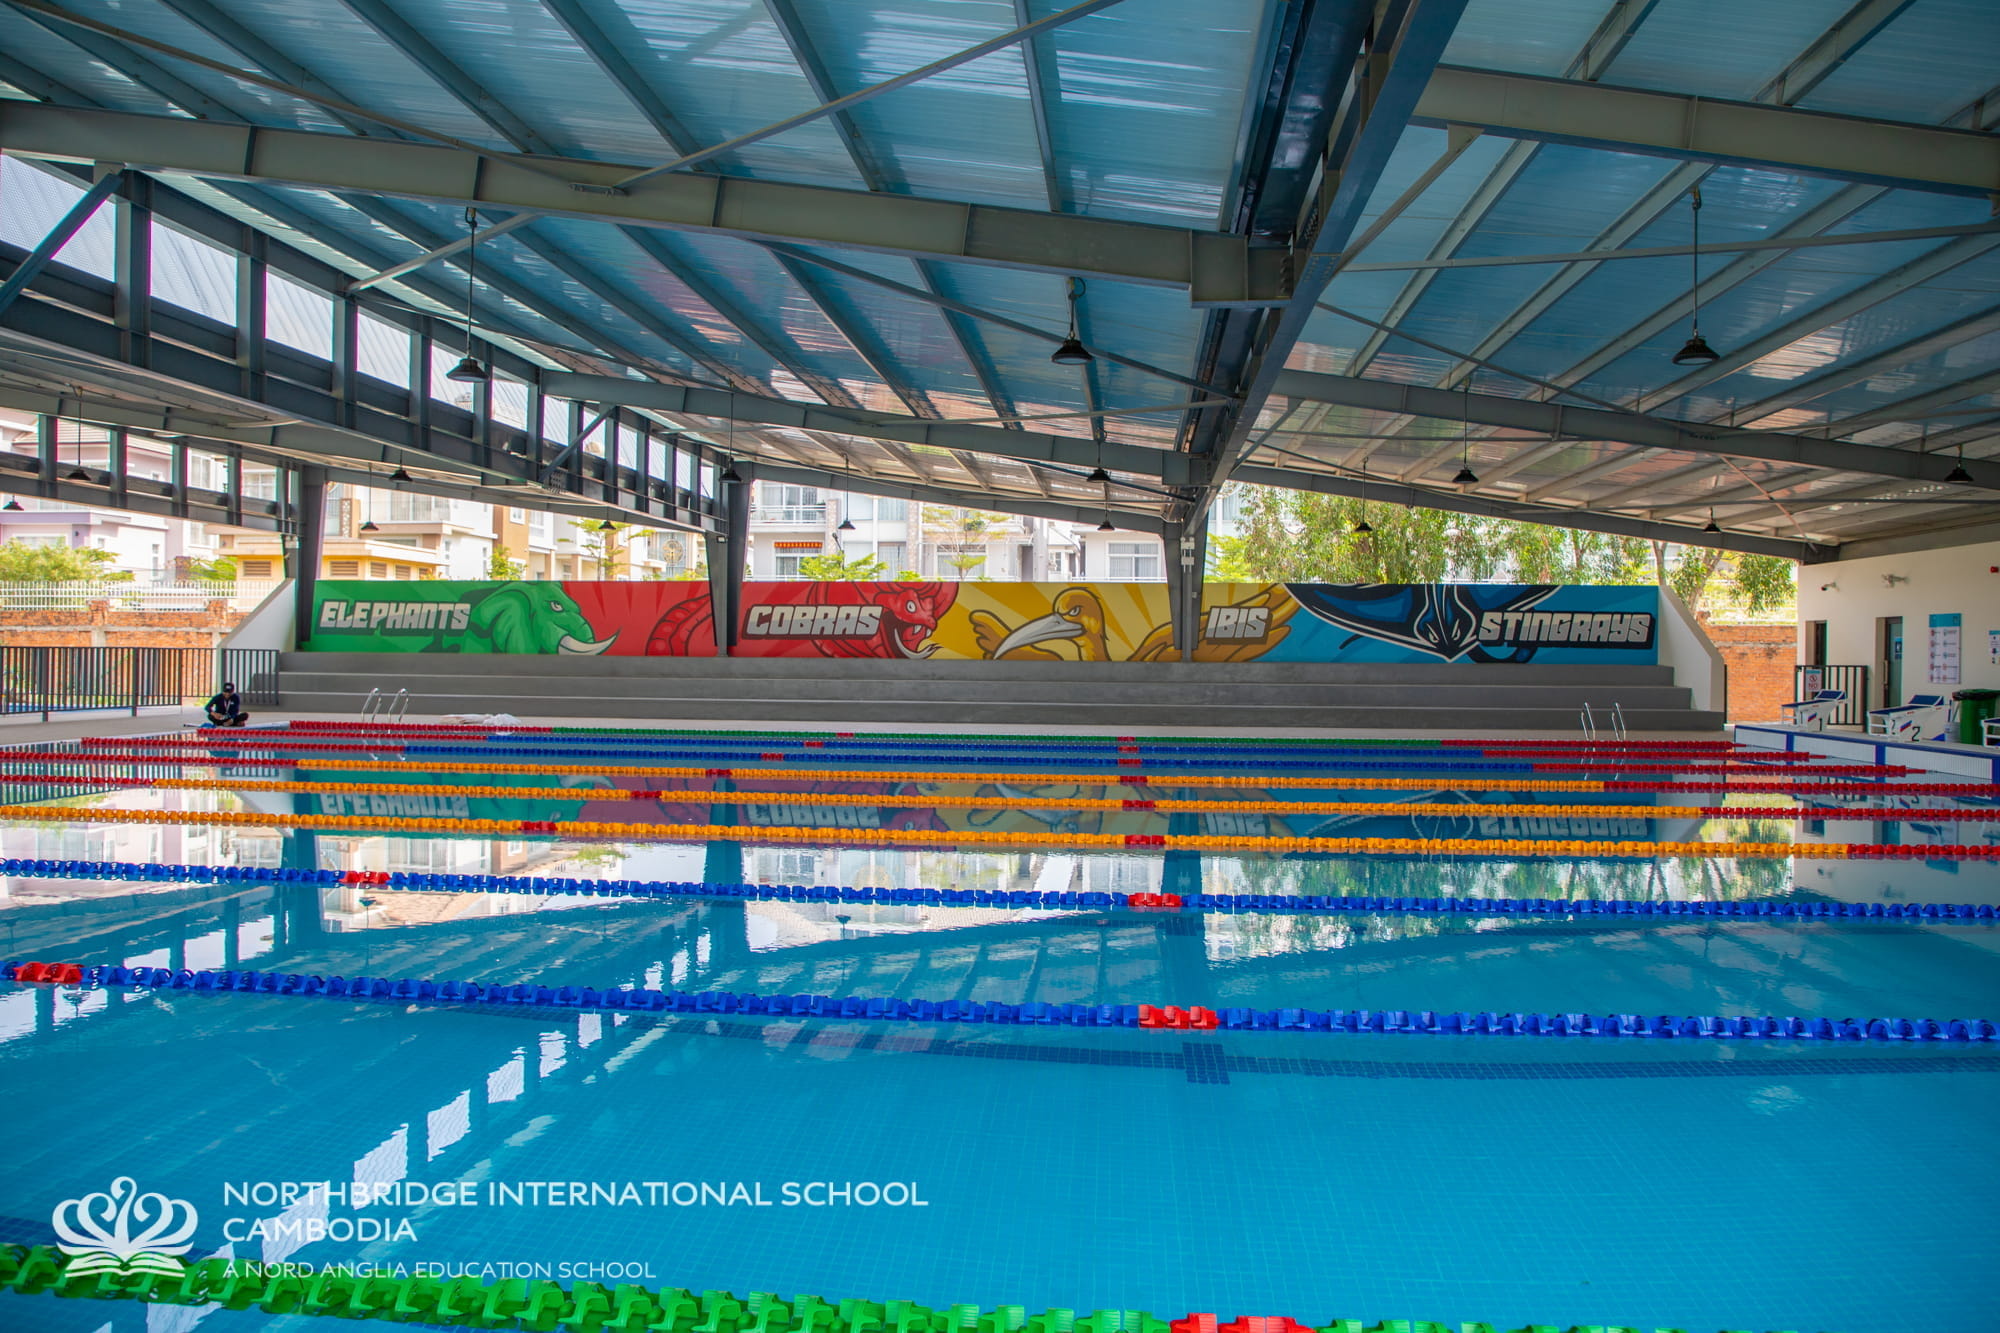 The new Northbridge Aquatics Centre gives students amazing new opportunities for water sports - the-new-northbridge-aquatics-centre-gives-students-amazing-new-opportunities-for-water-sports